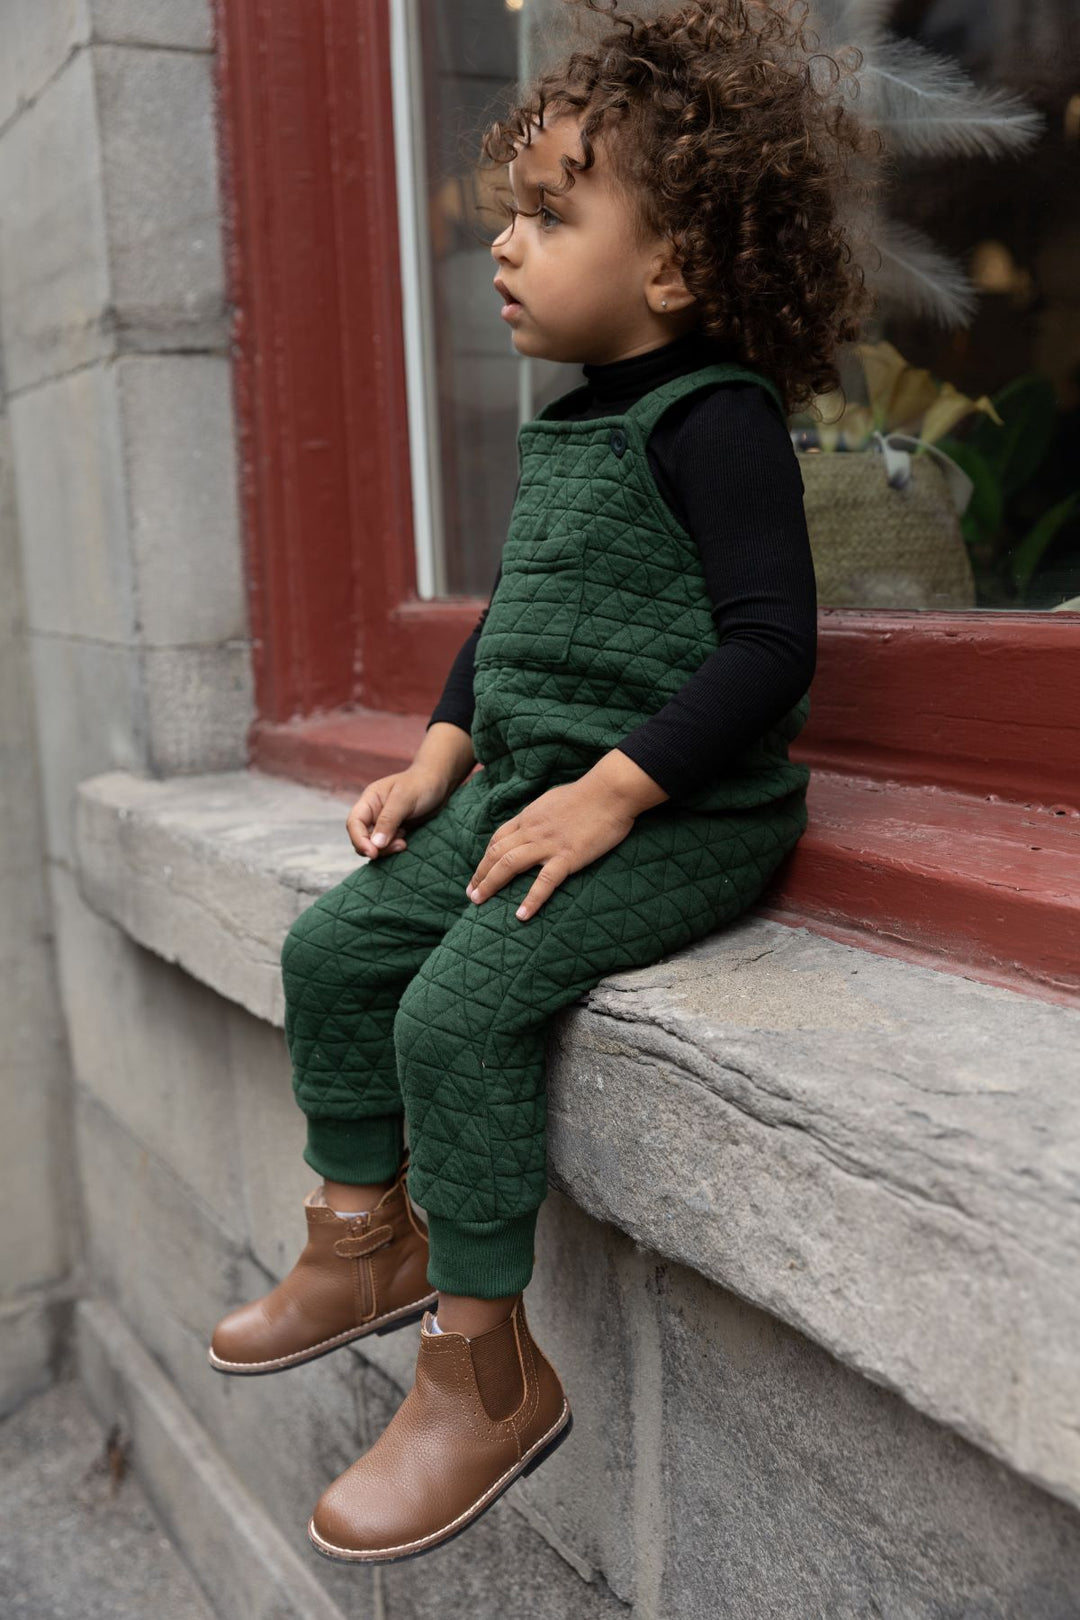 Baby Triangle Quilted Bib Overall - Green